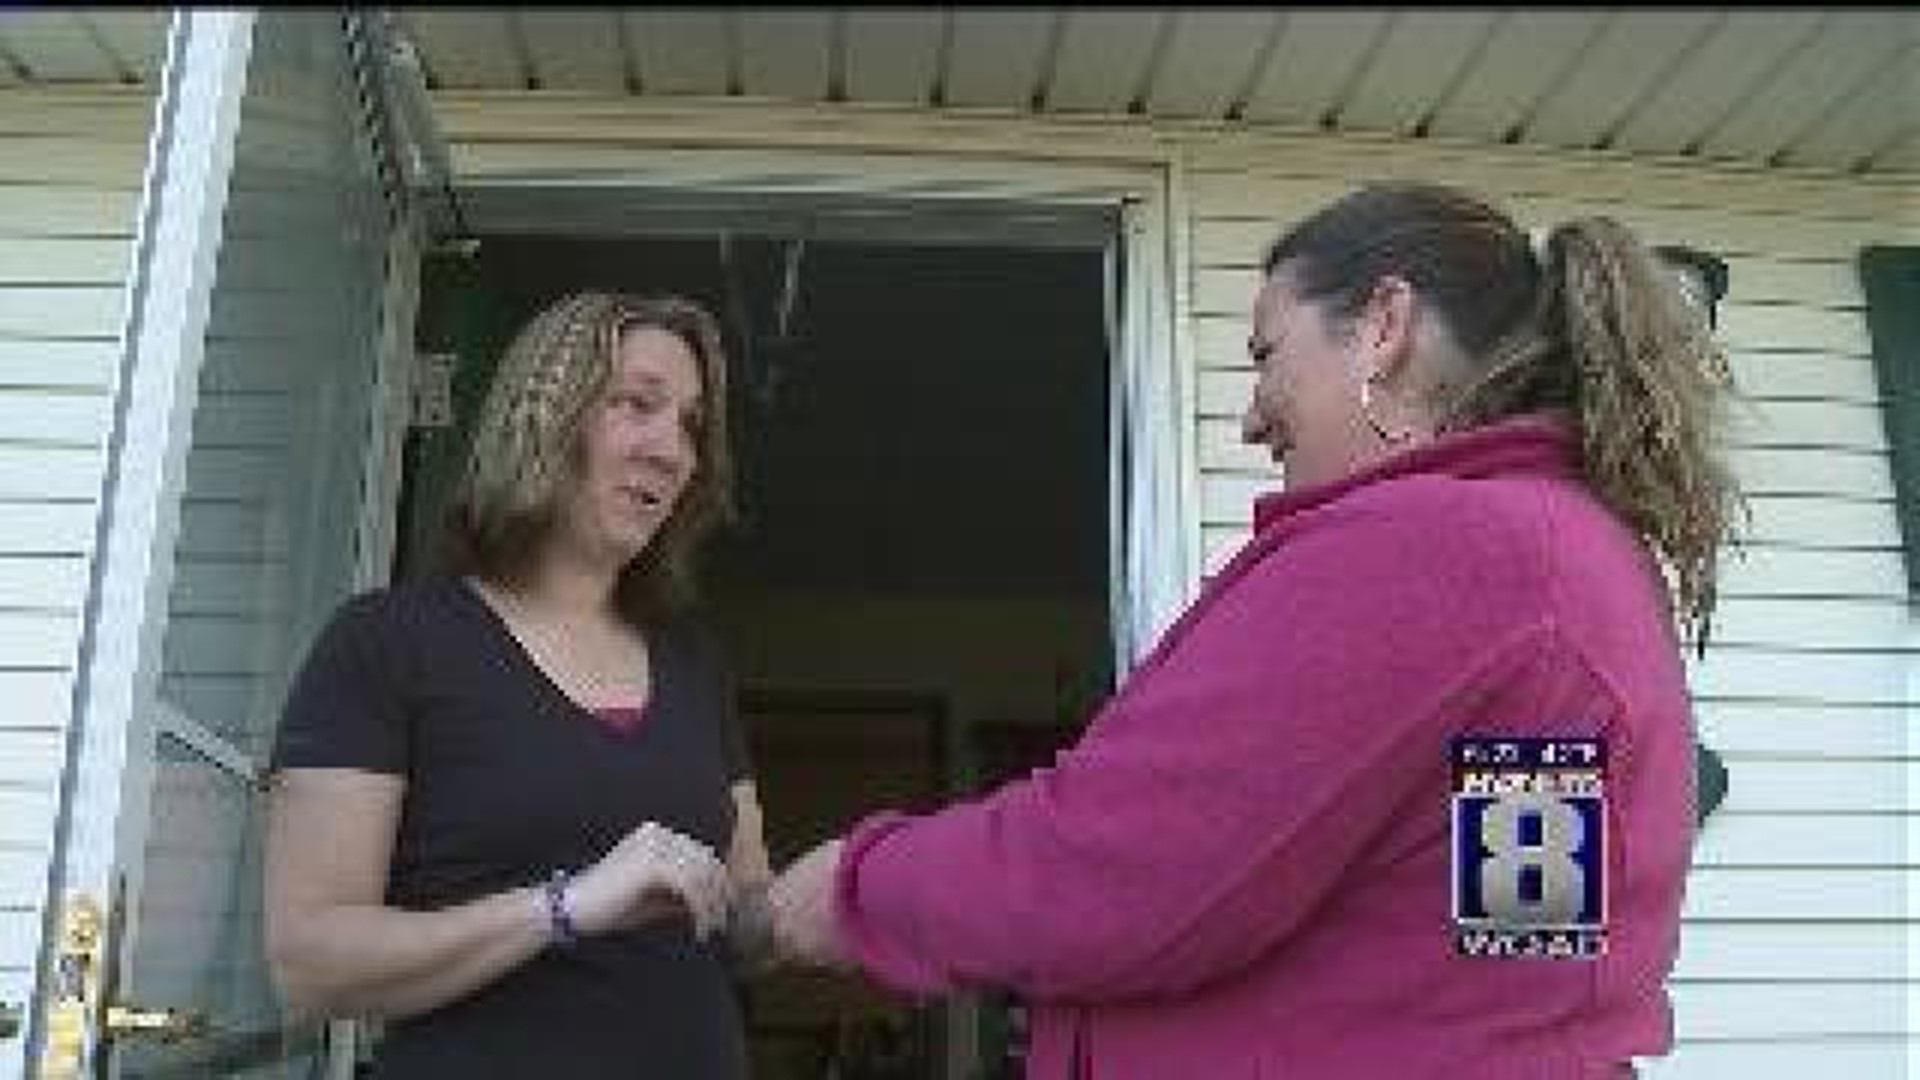 News 8 "Pays it Forward" to a Military Mom